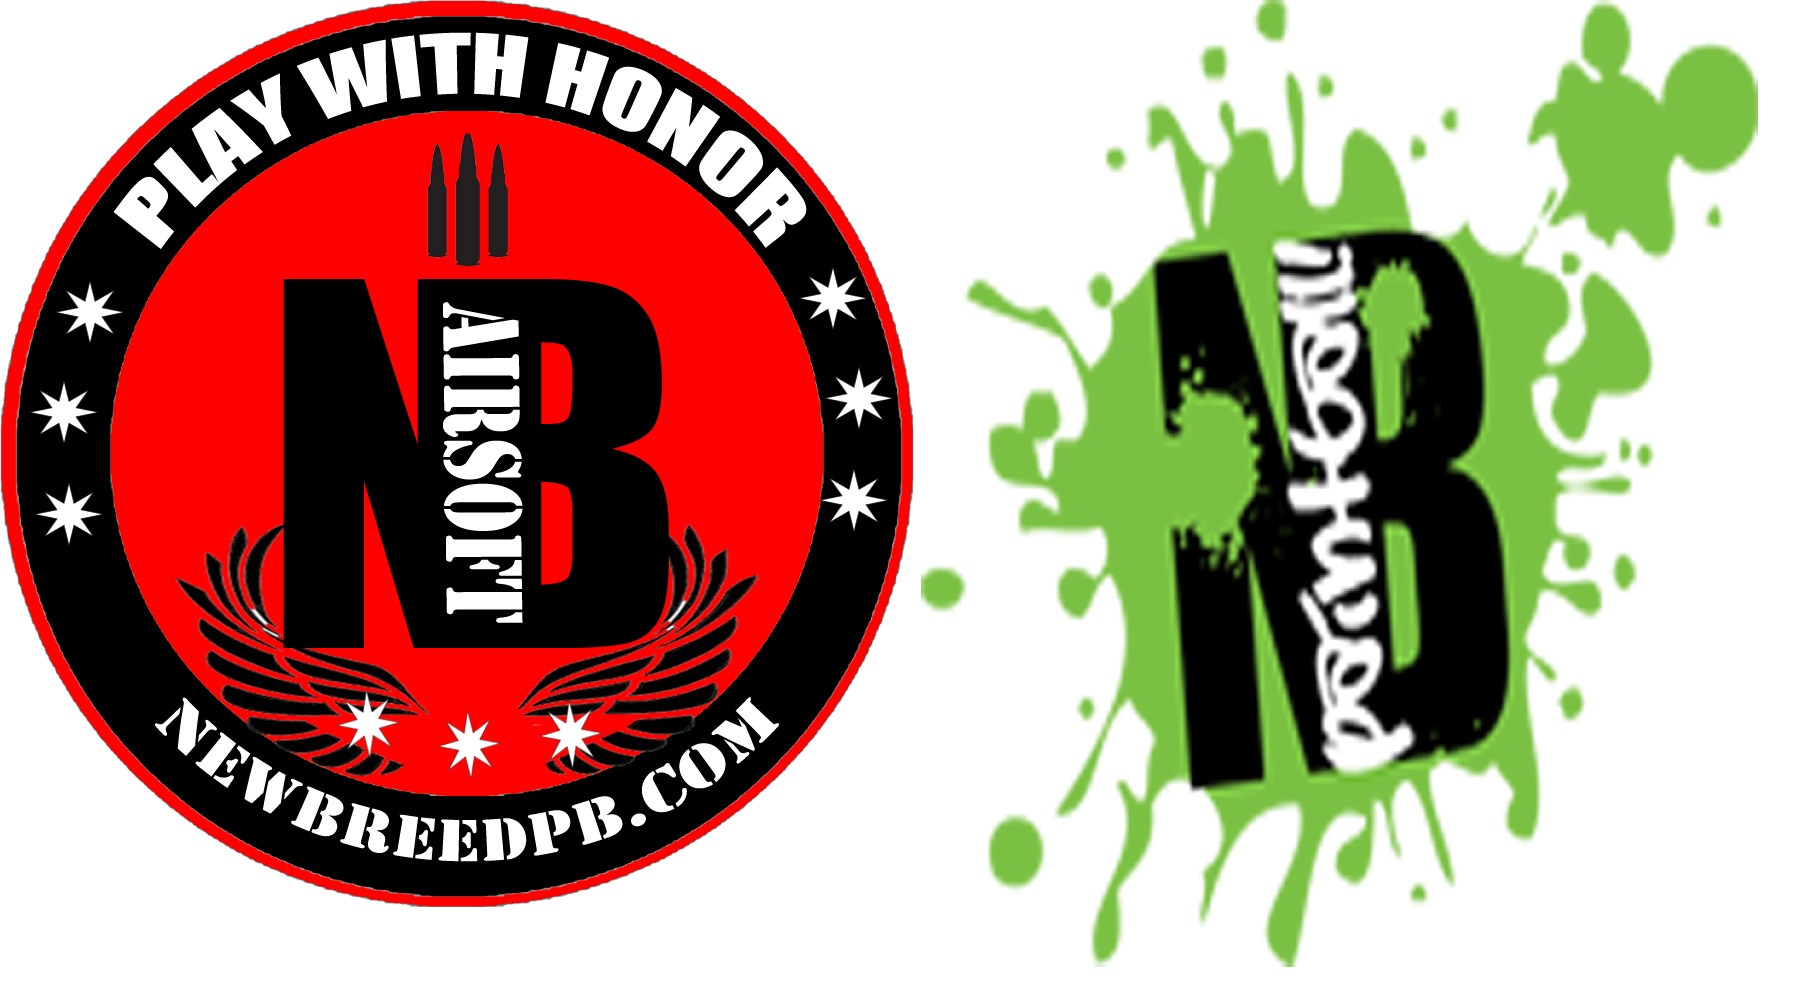 New Breed Paintball and Airsoft Logos